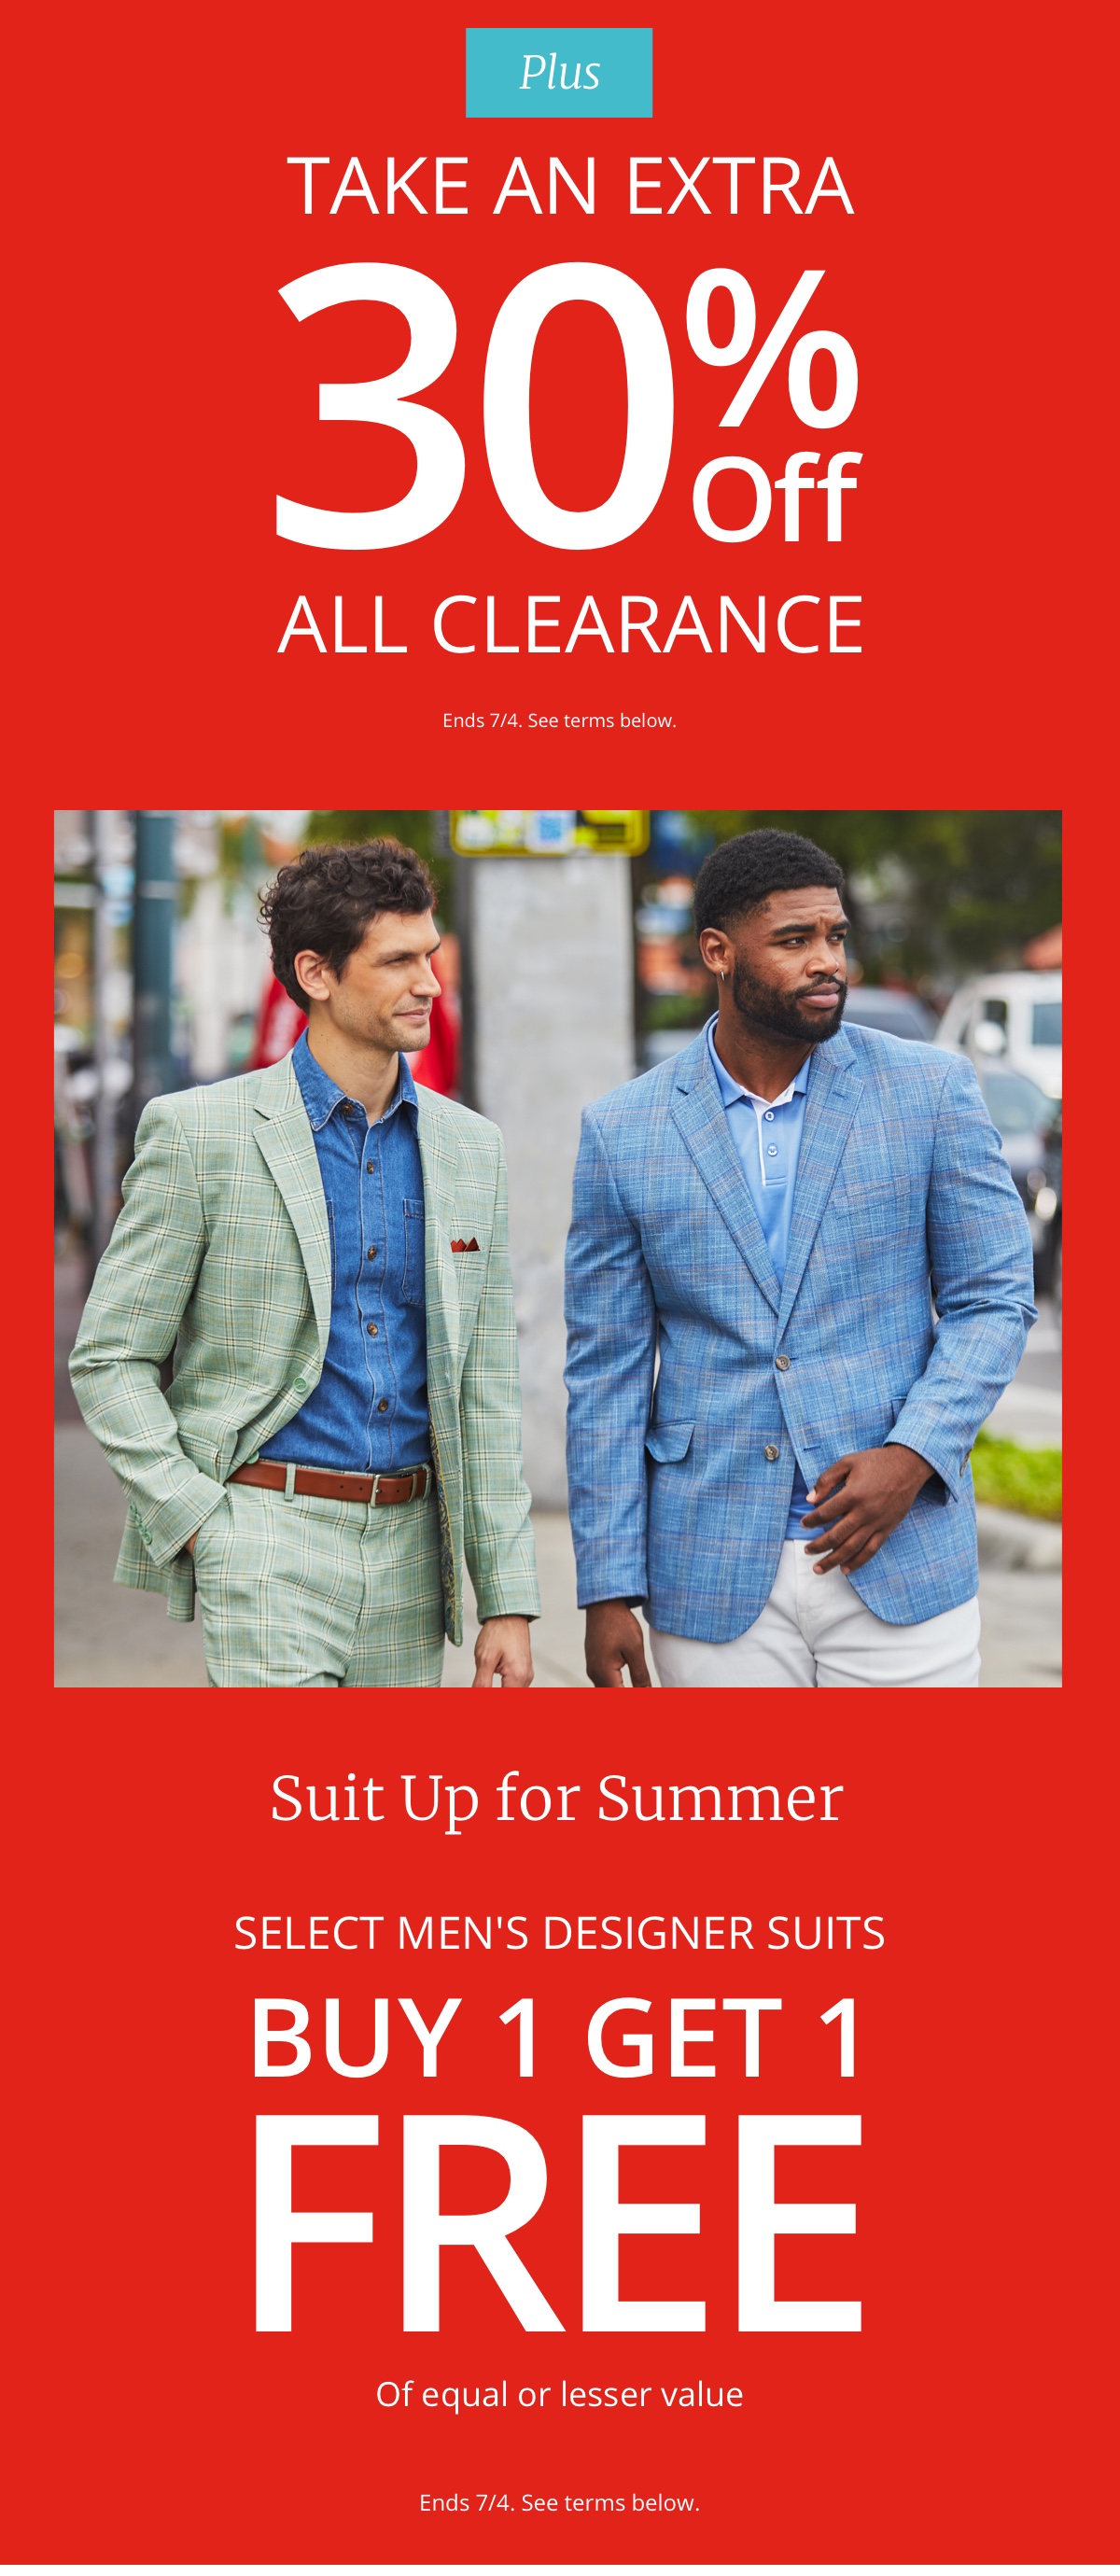 |Plus|Take an Extra|30%| Off All Clearance|Ends 7/4. See terms below. Suit Up for Summer|Select Men s Designer Suits| Buy 1 Get 1| FREE|Of equal or lesser value|Ends 7/4. See terms below.